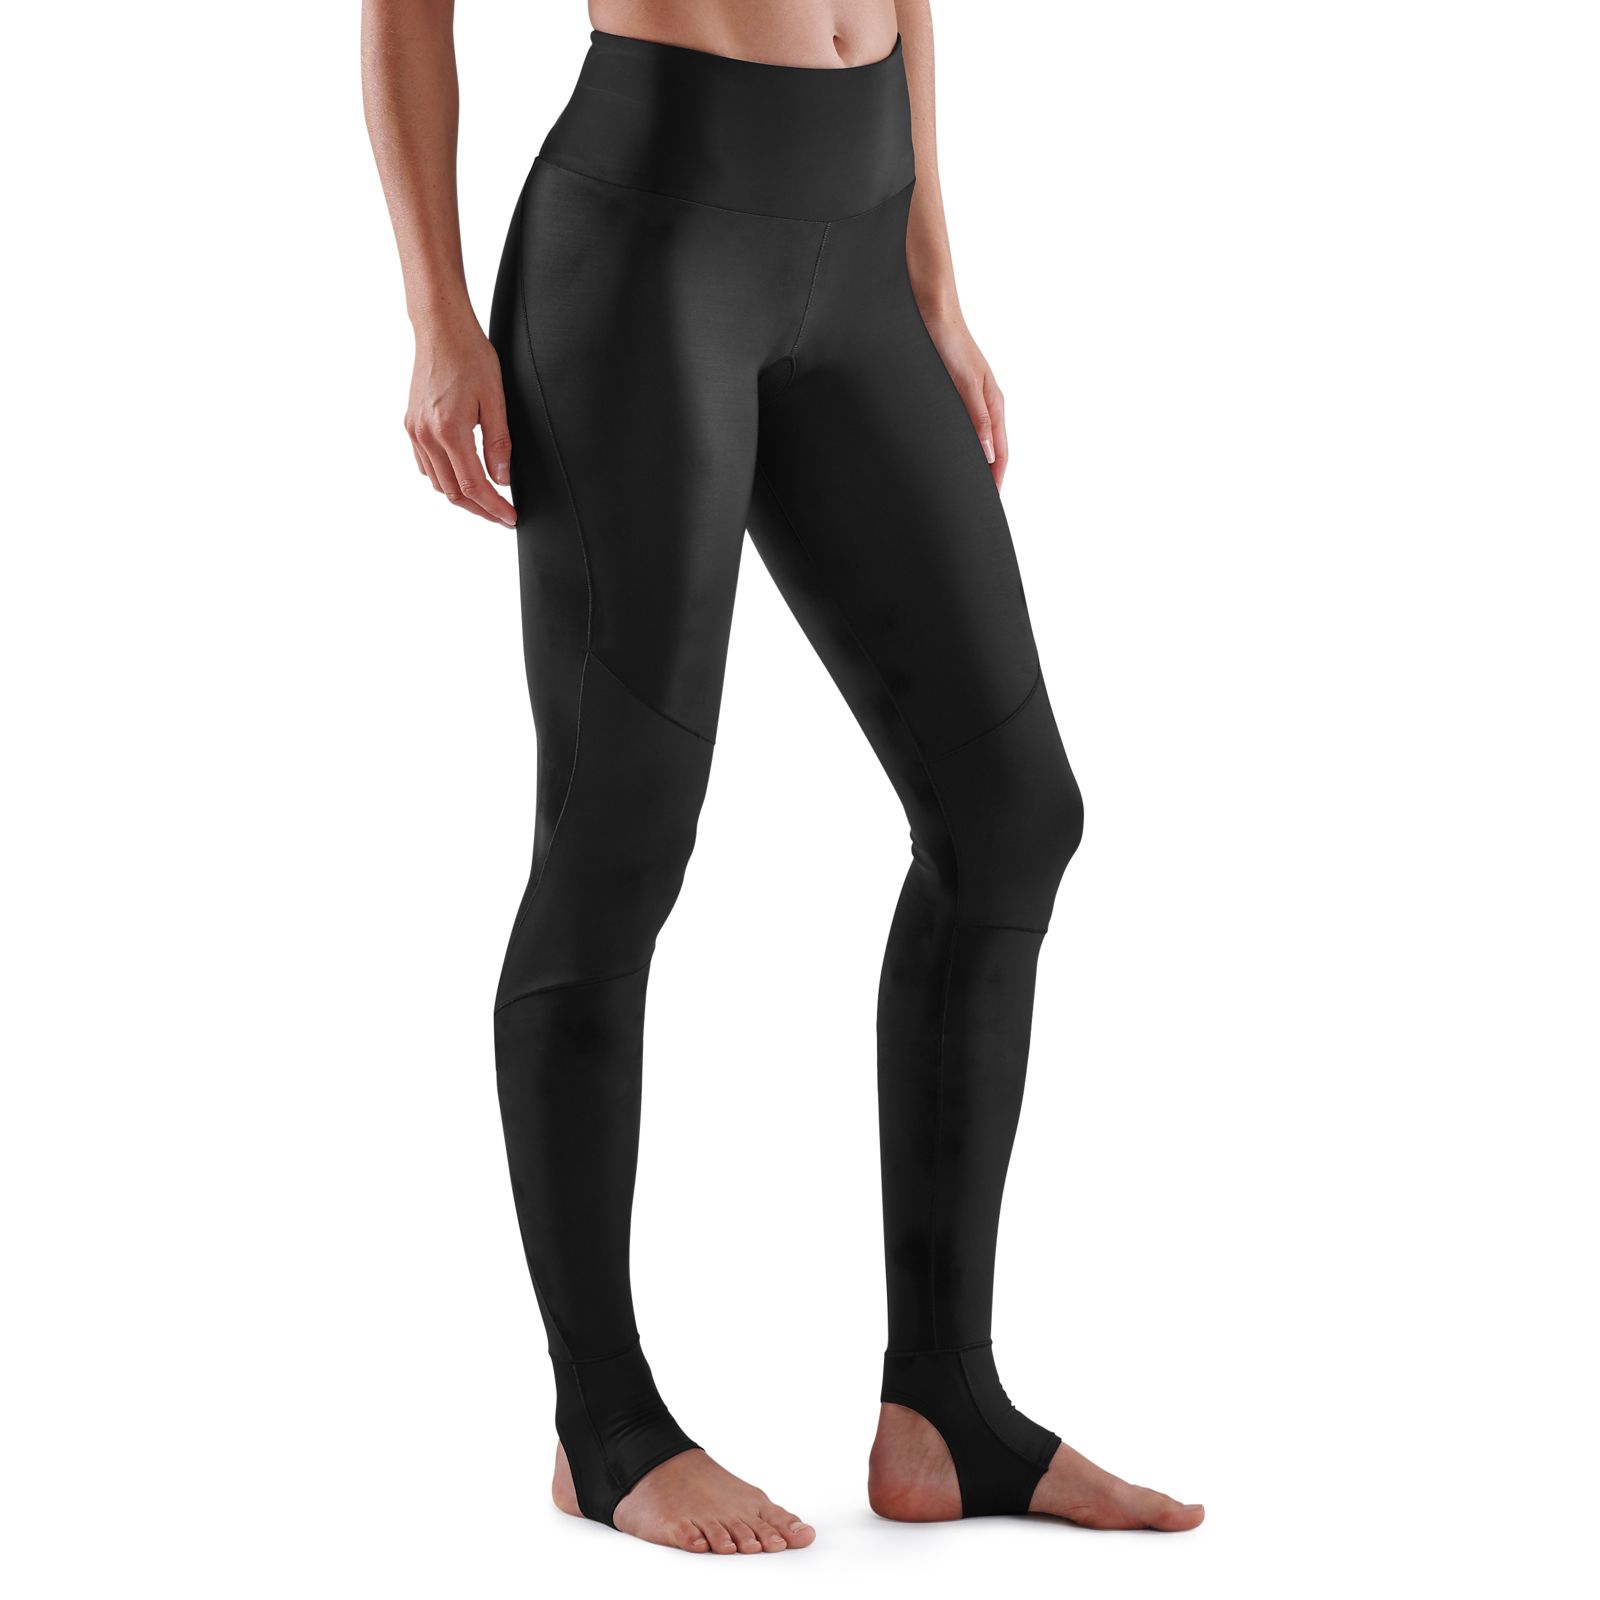  SKINS Women's Series-3 Compression Travel and Recovery